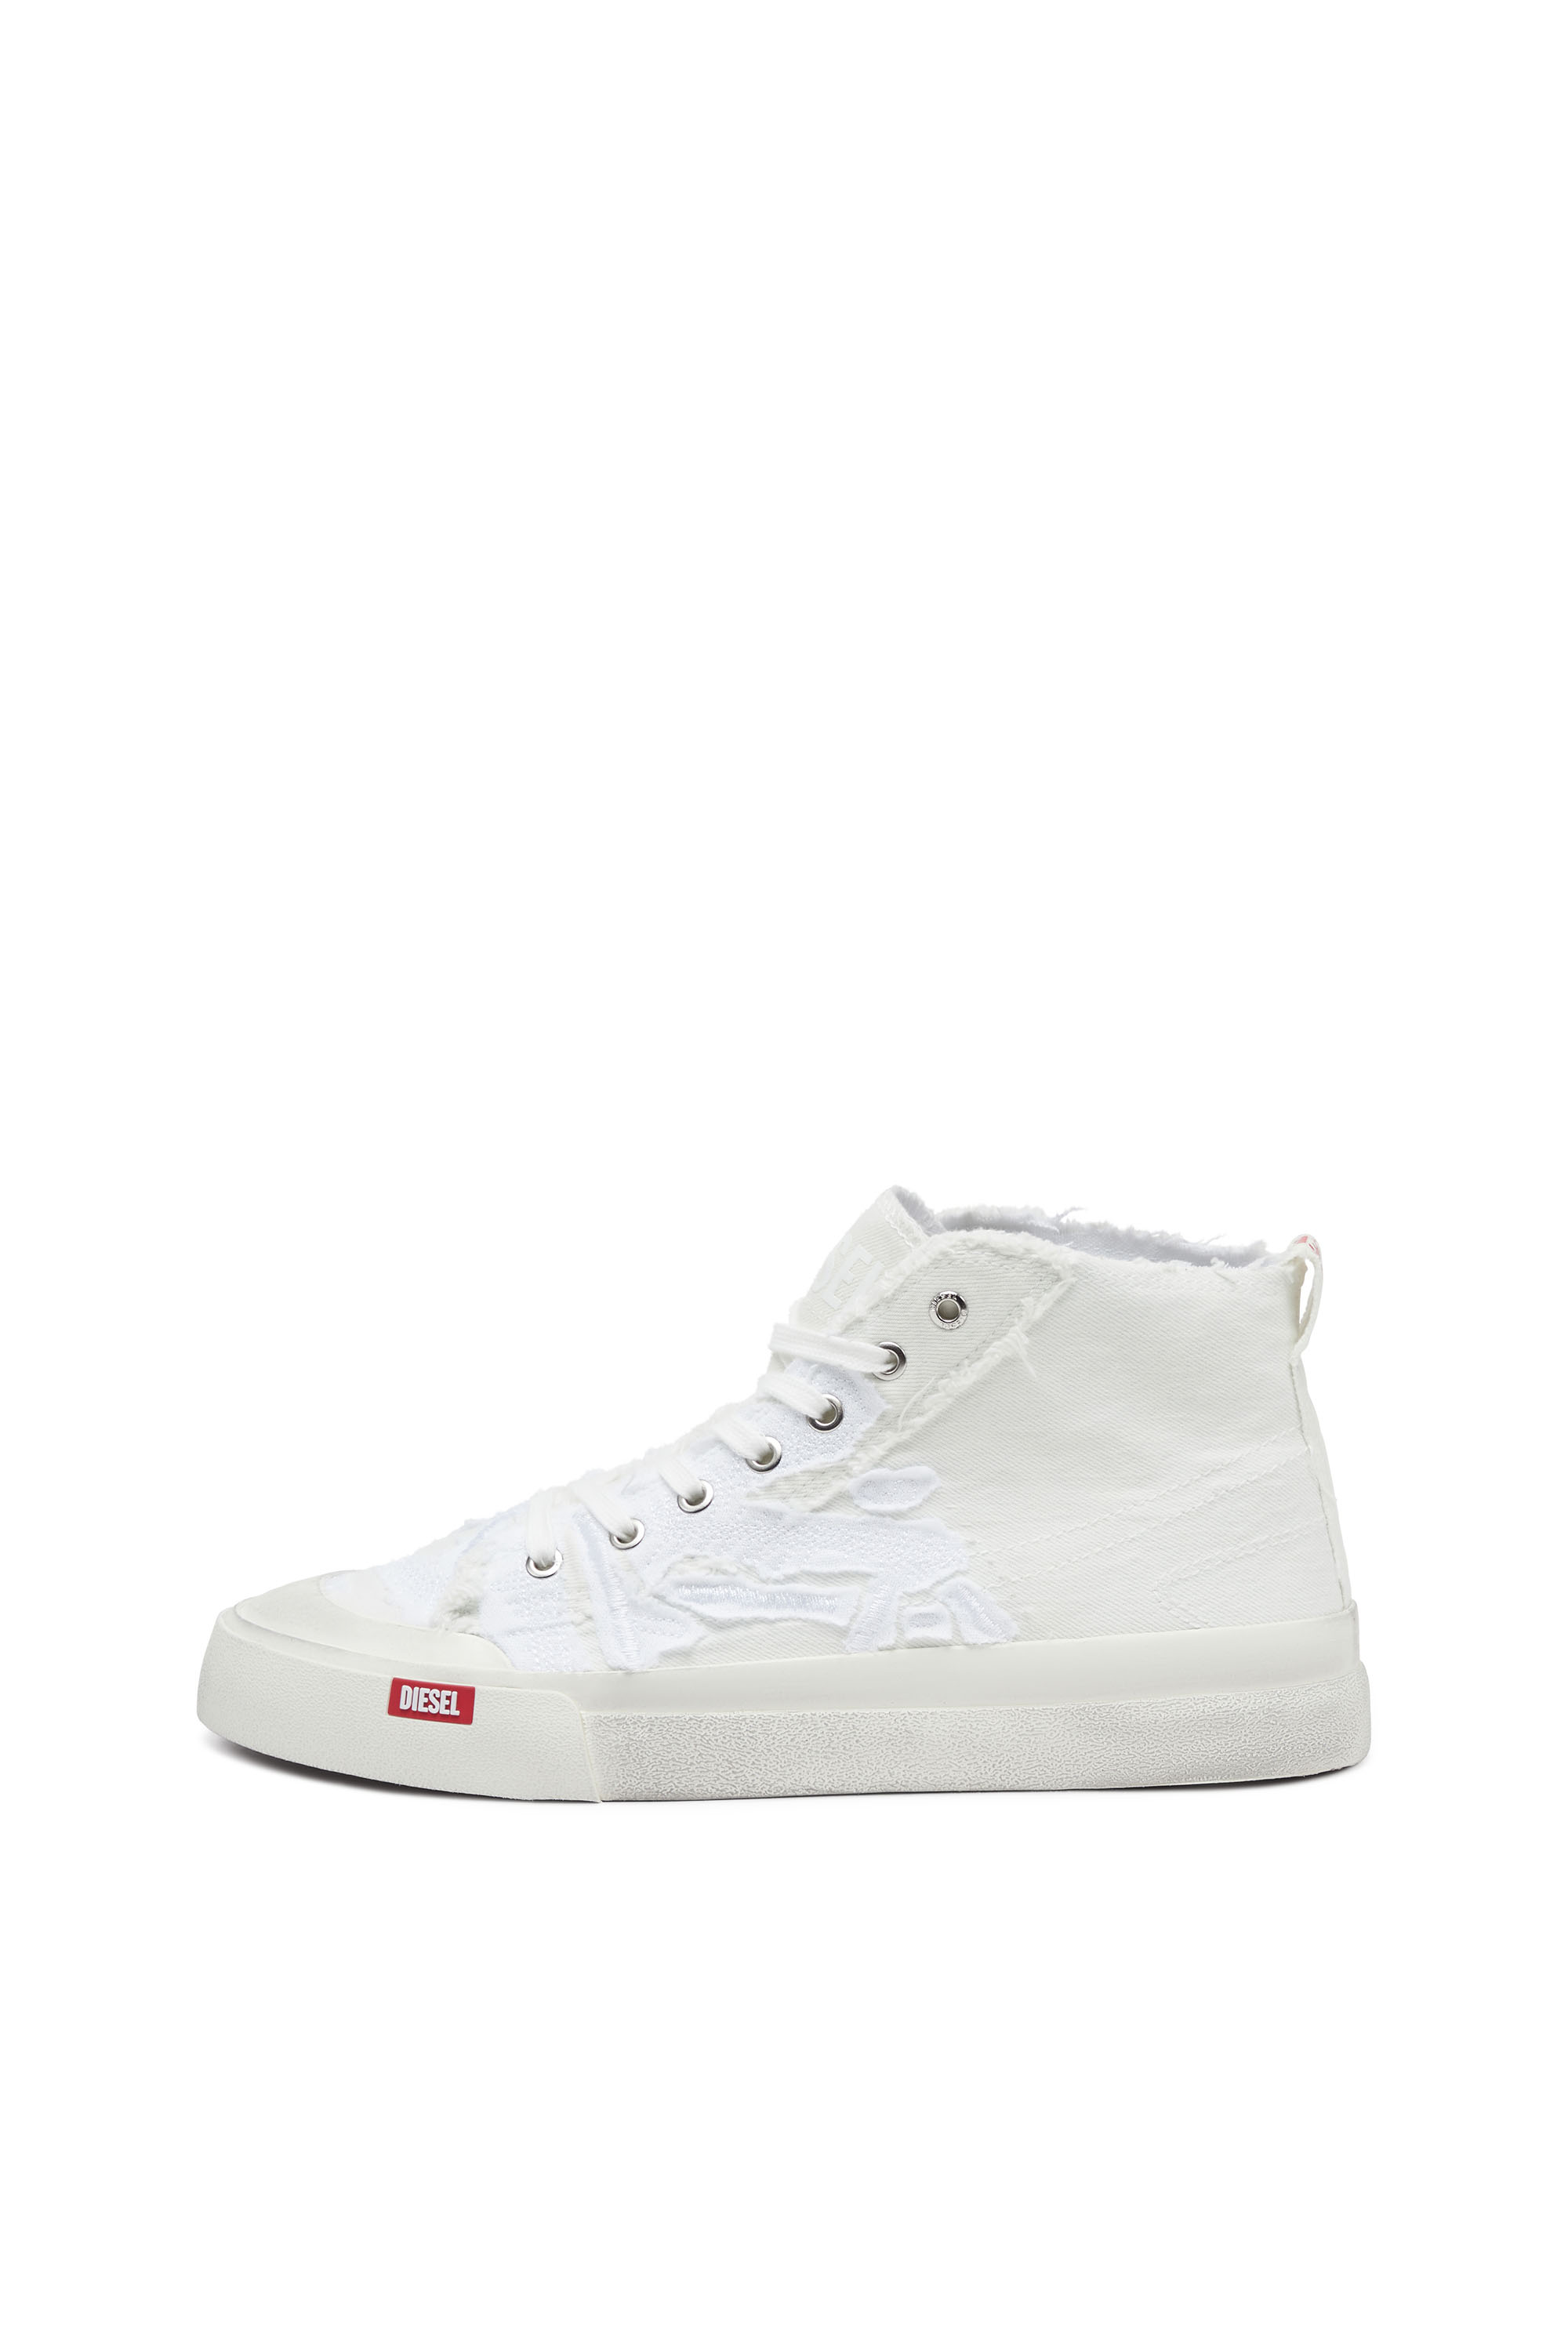 Diesel - S-ATHOS MID, Man S-Athos Mid-Destroyed gauze and denim high-top sneakers in White - Image 7